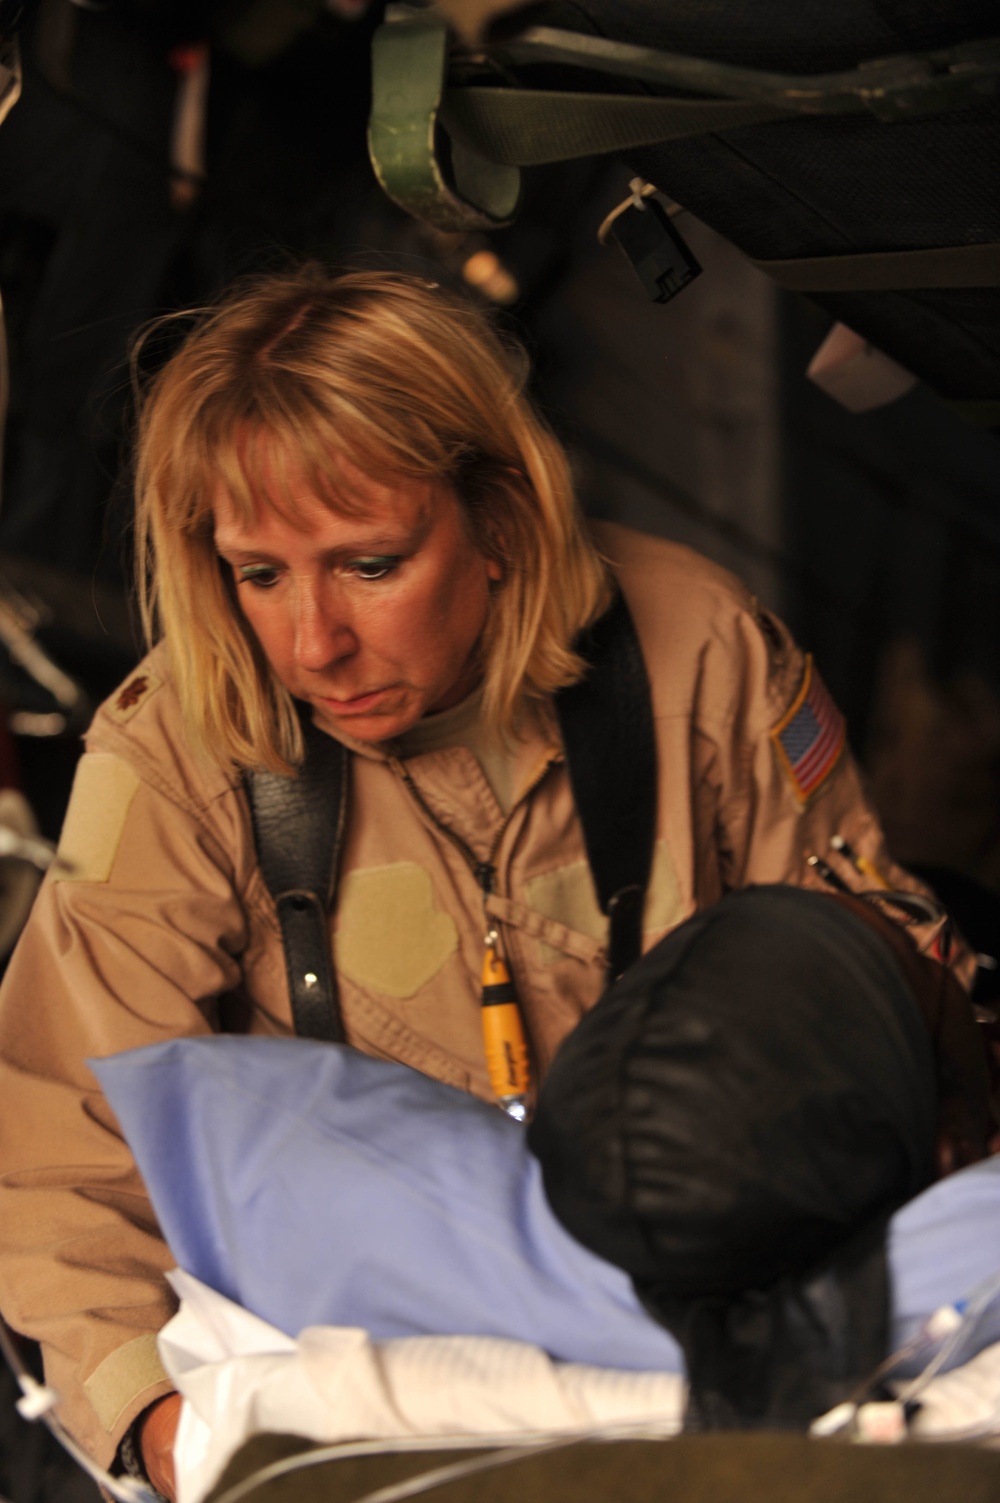 Medical aircrew saves lives - one stop at a time